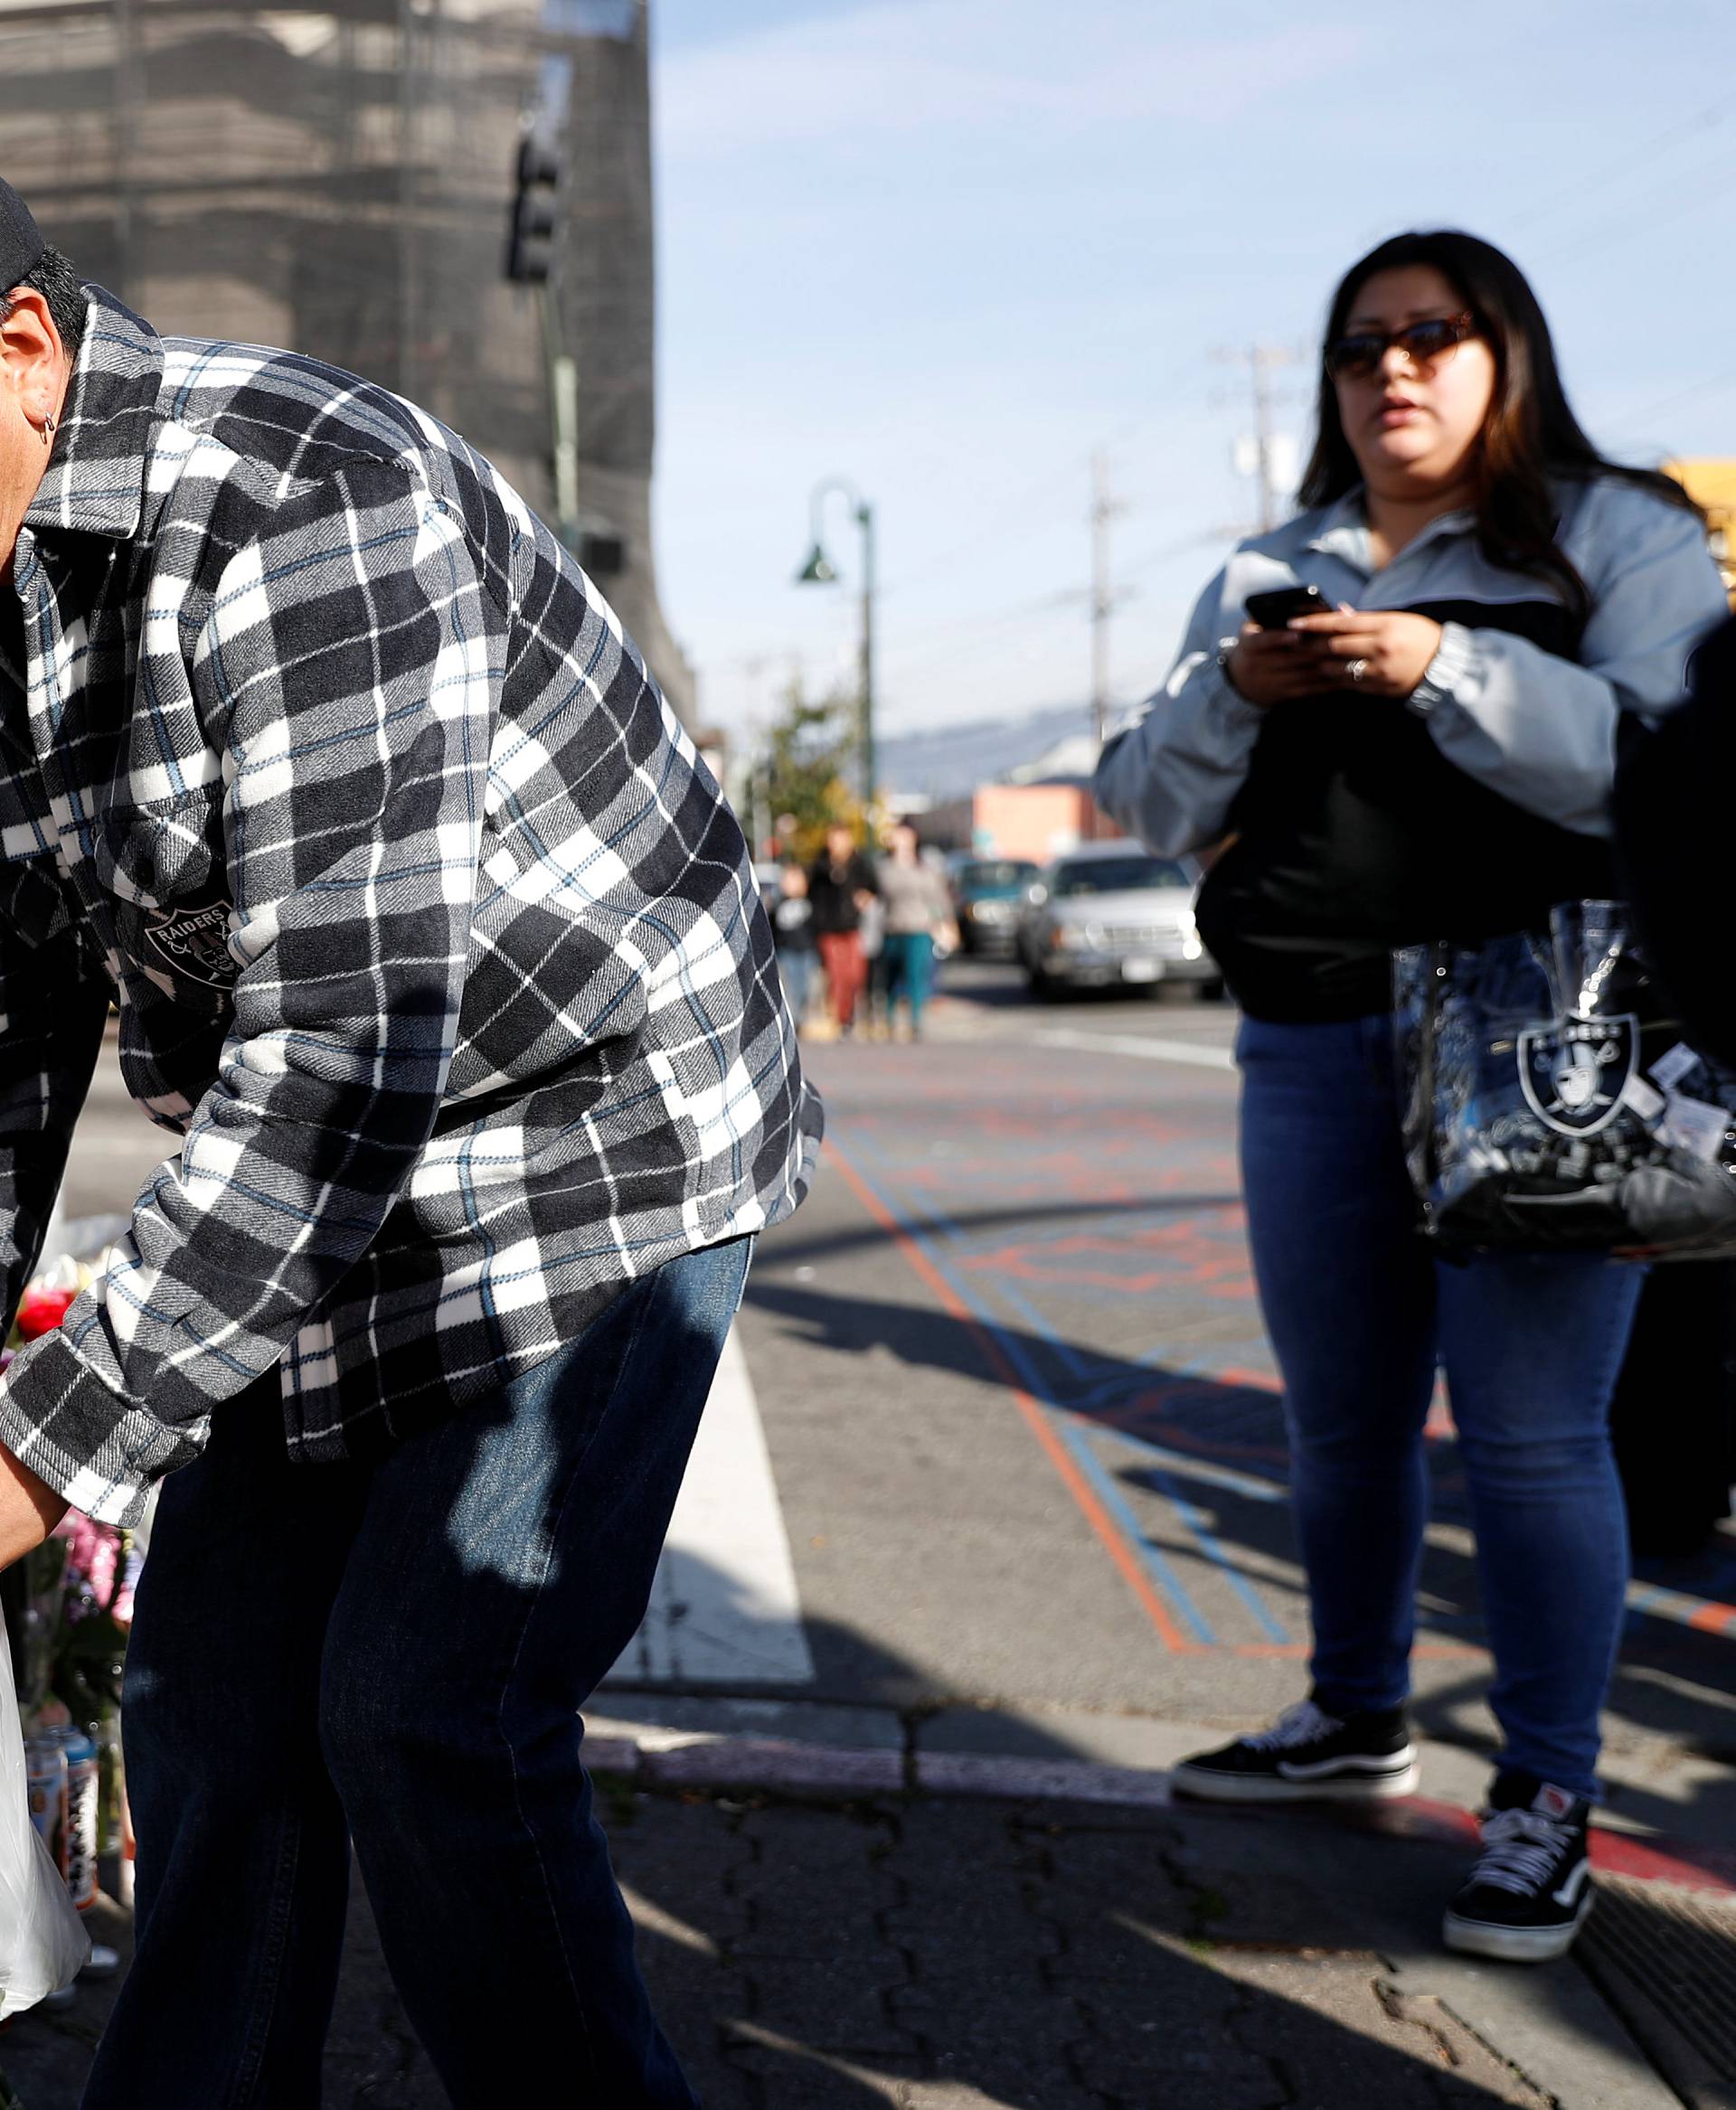 Joel Cruz, of Milpitas, places flowers at a makeshift memorial near the scene of a fire in the Fruitvale district of Oakland, California